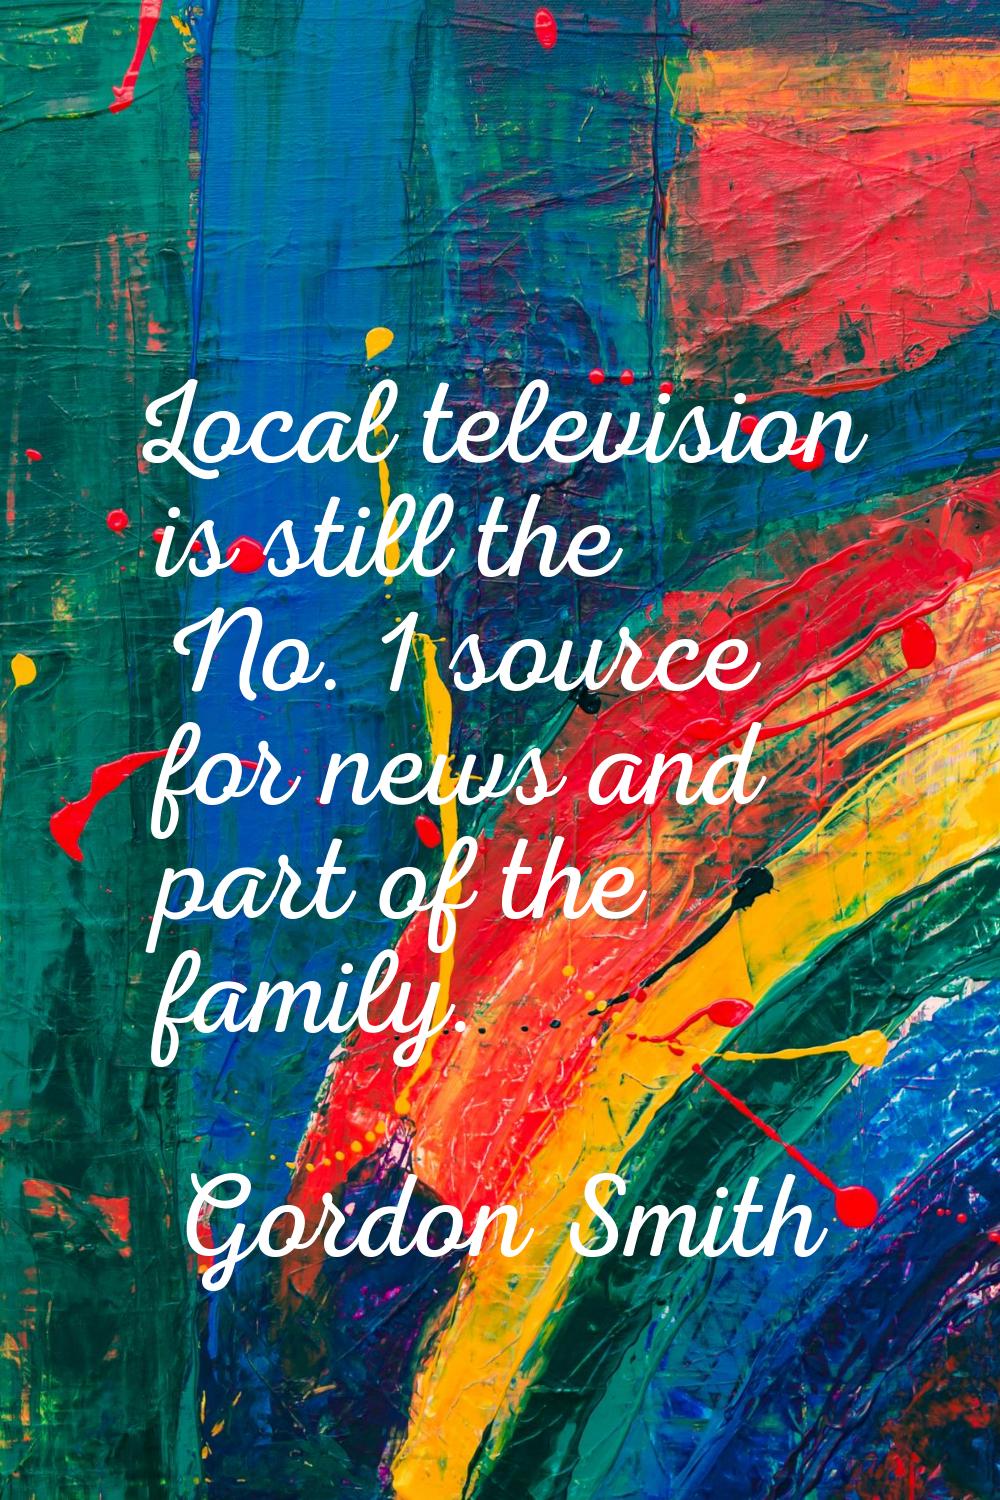 Local television is still the No. 1 source for news and part of the family.